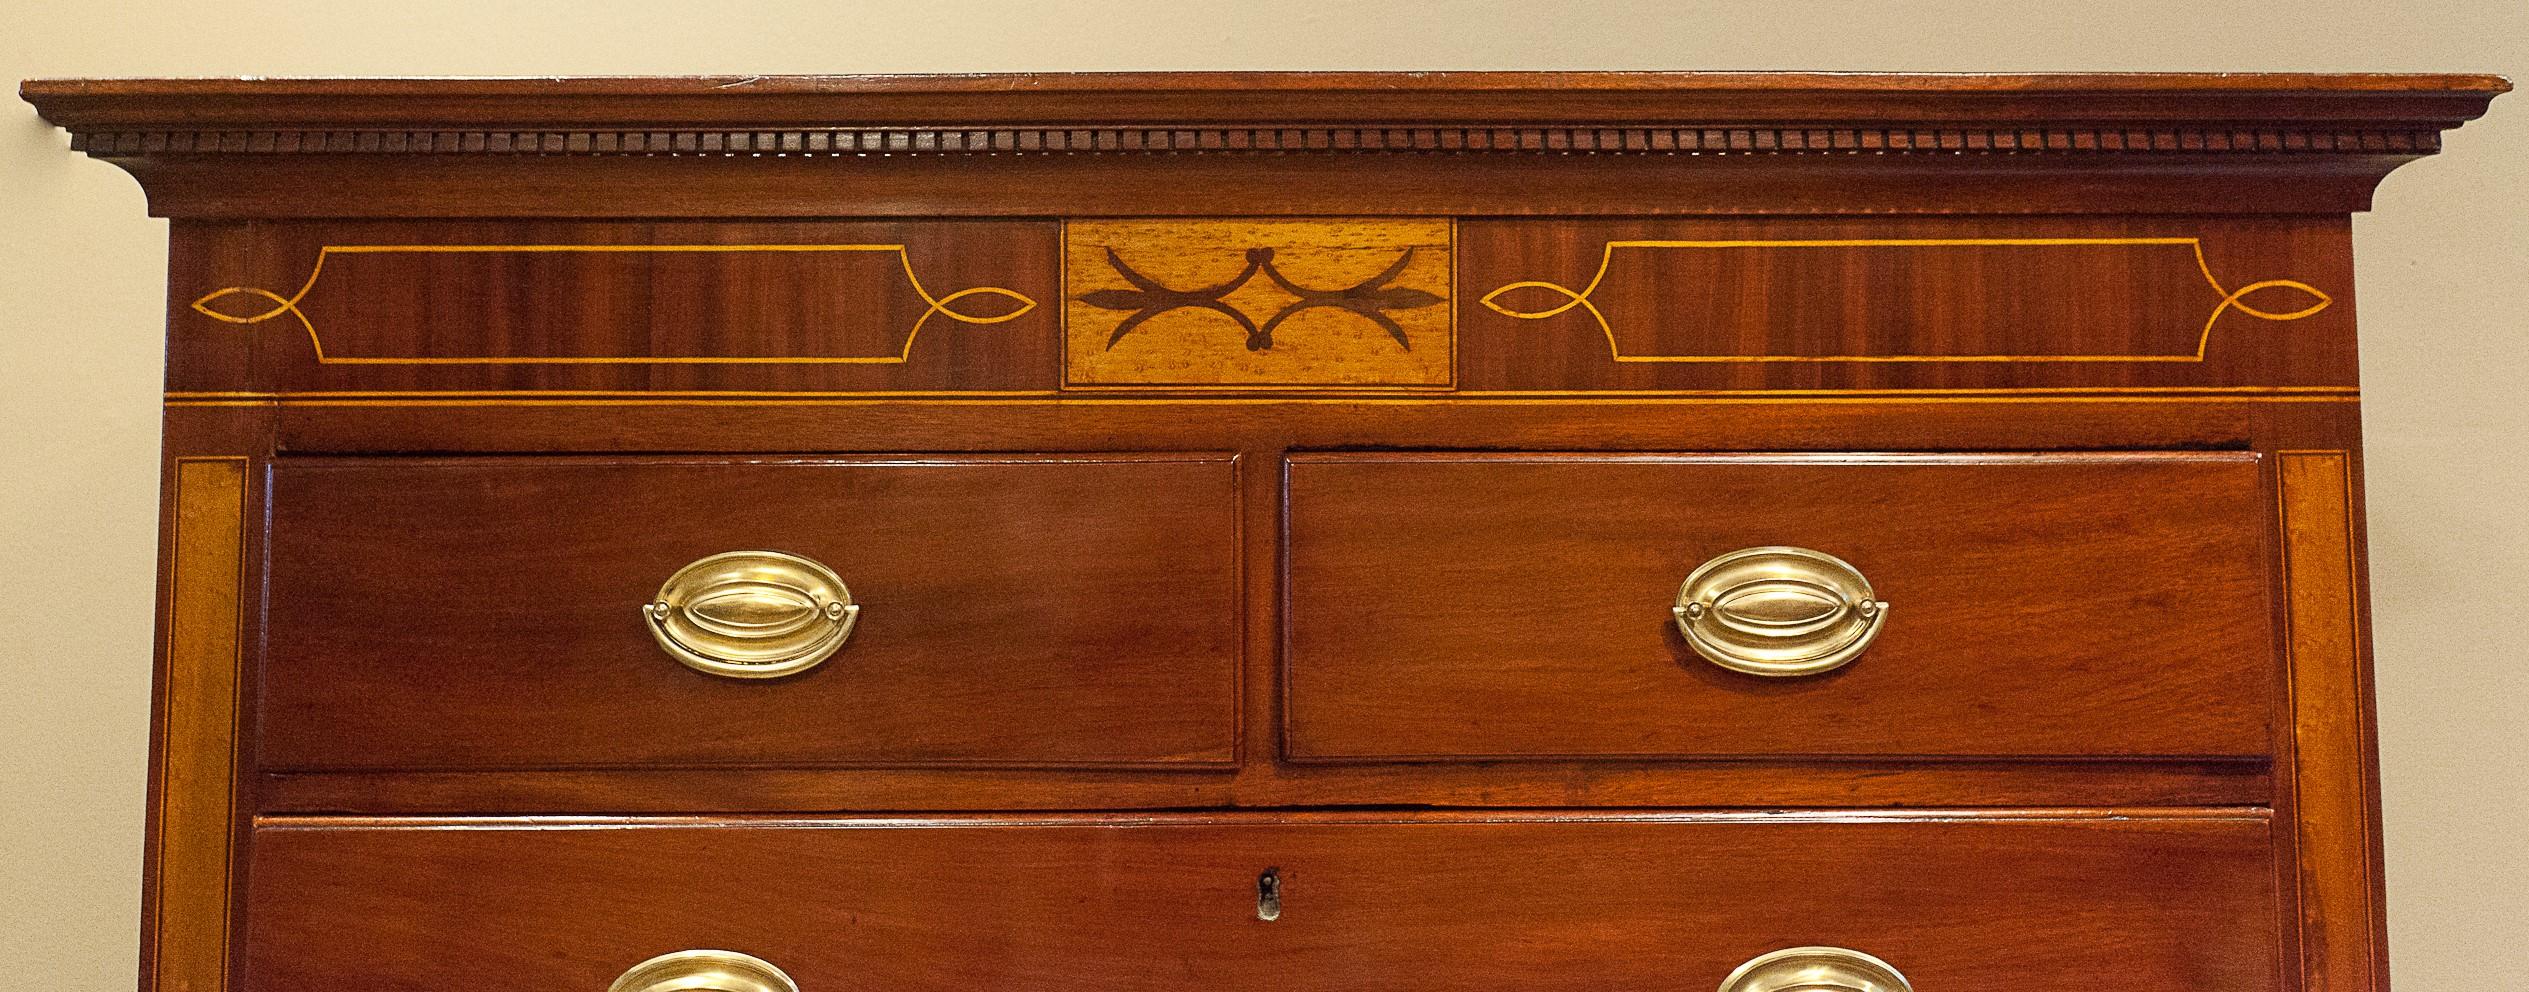 This Hepplewhite chest on chest is made of mahogany with bird's-eye maple, satinwood, and mahogany inlay, all French polished. The Hepplewhite solid brass pulls are replacements. The piece has two over six drawers for a total of eight drawers,